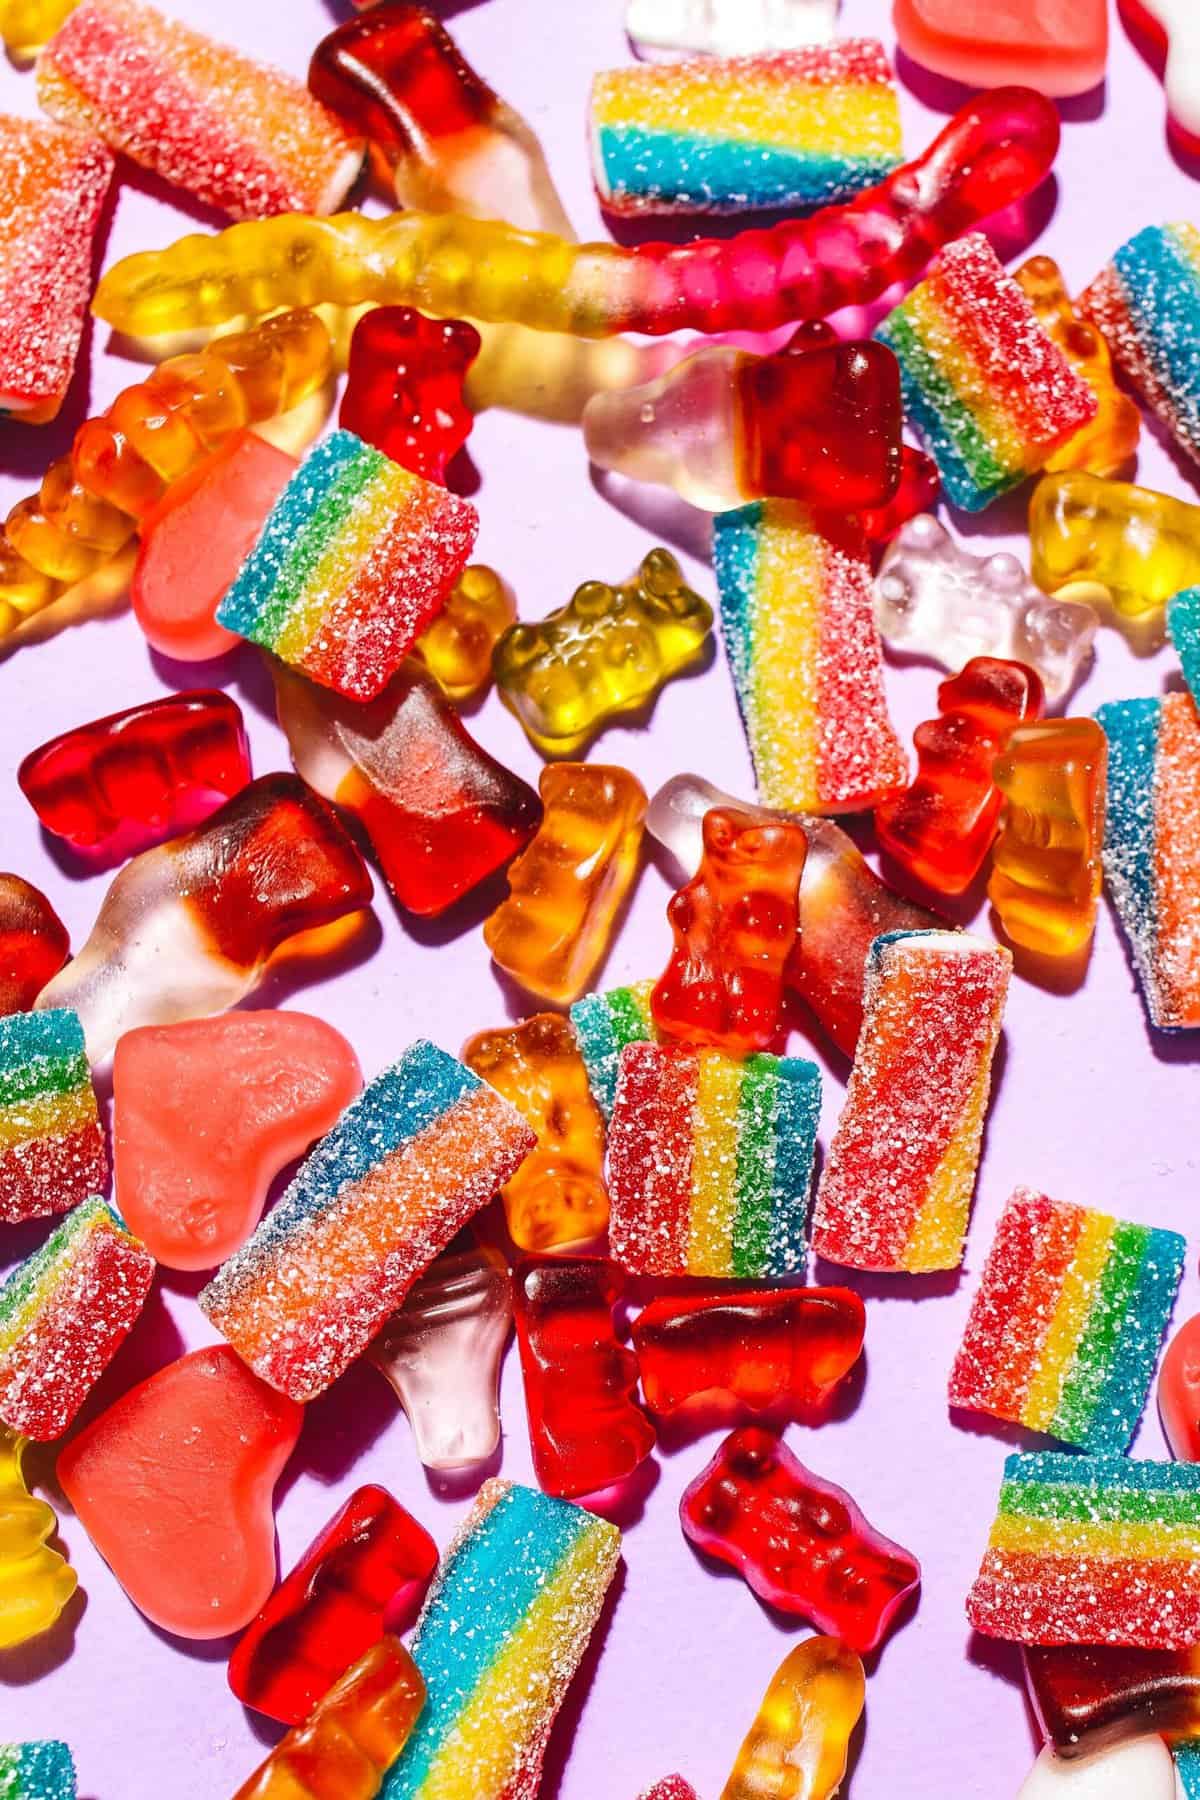 Gluten Free Candy gummy bears and sour strips